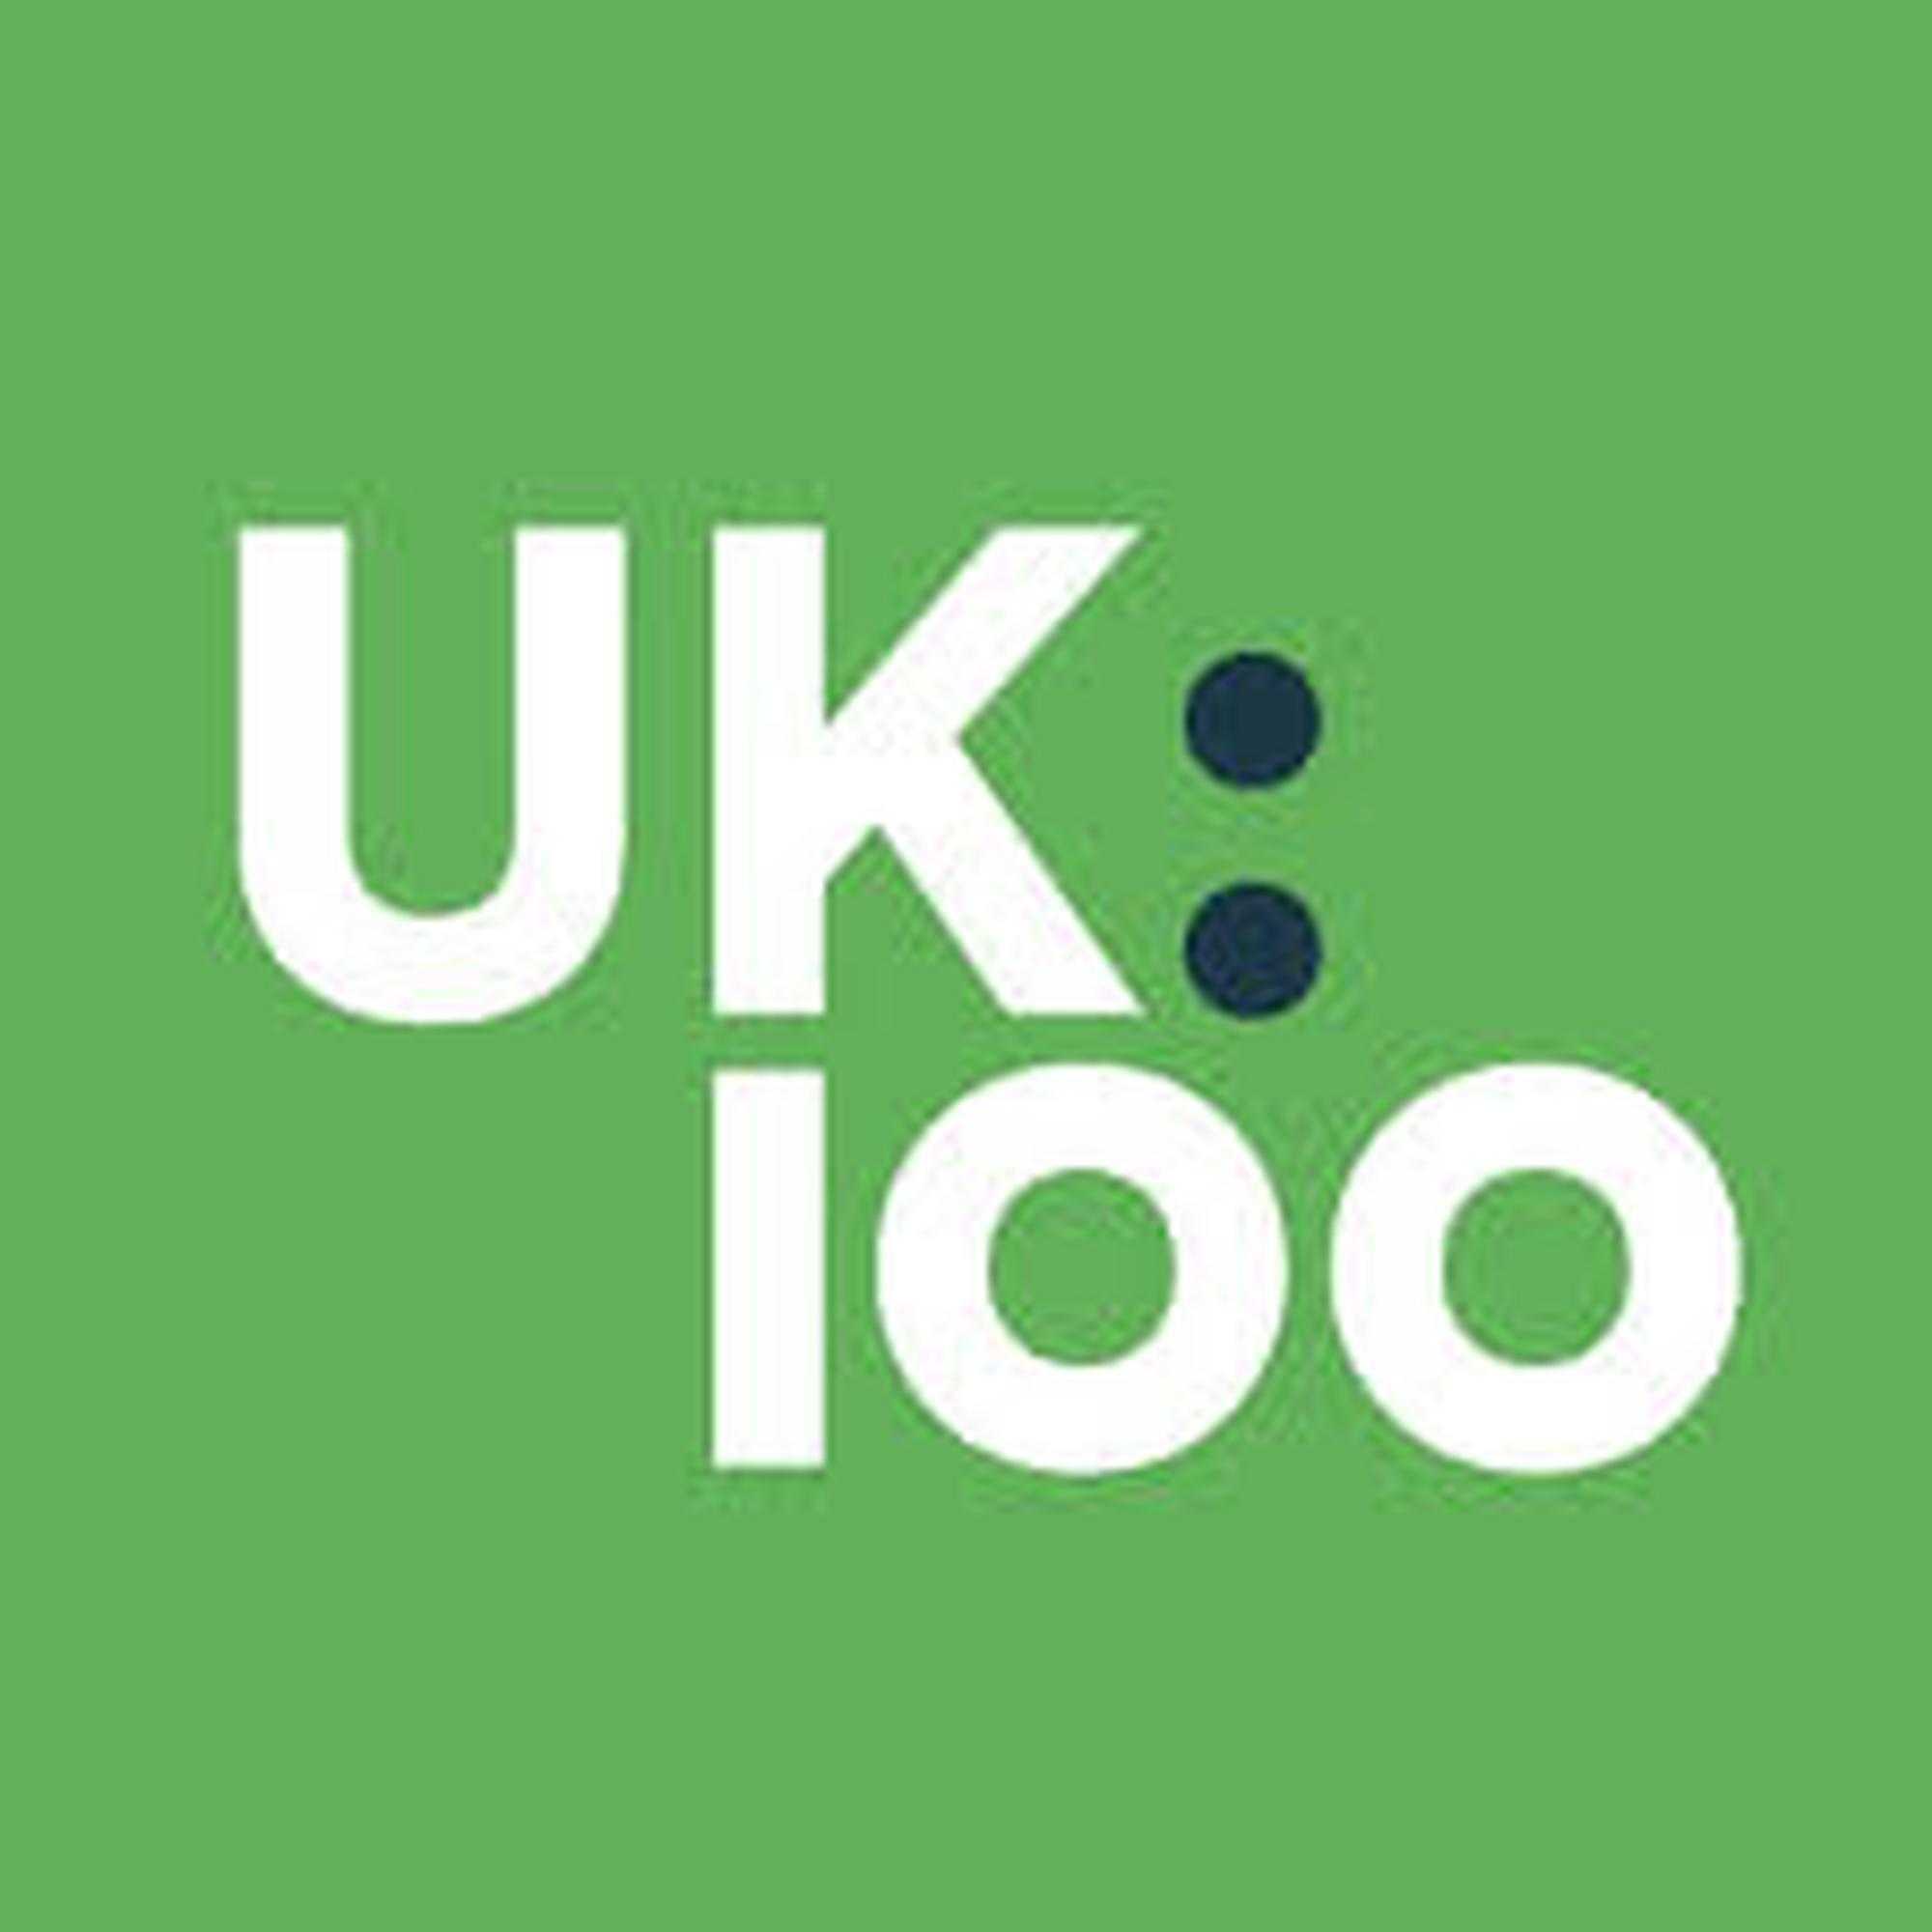 UK100 is a network of over 100 local government leaders who have pledged to secure the future for their communities by shifting to 100% clean energy by 2050